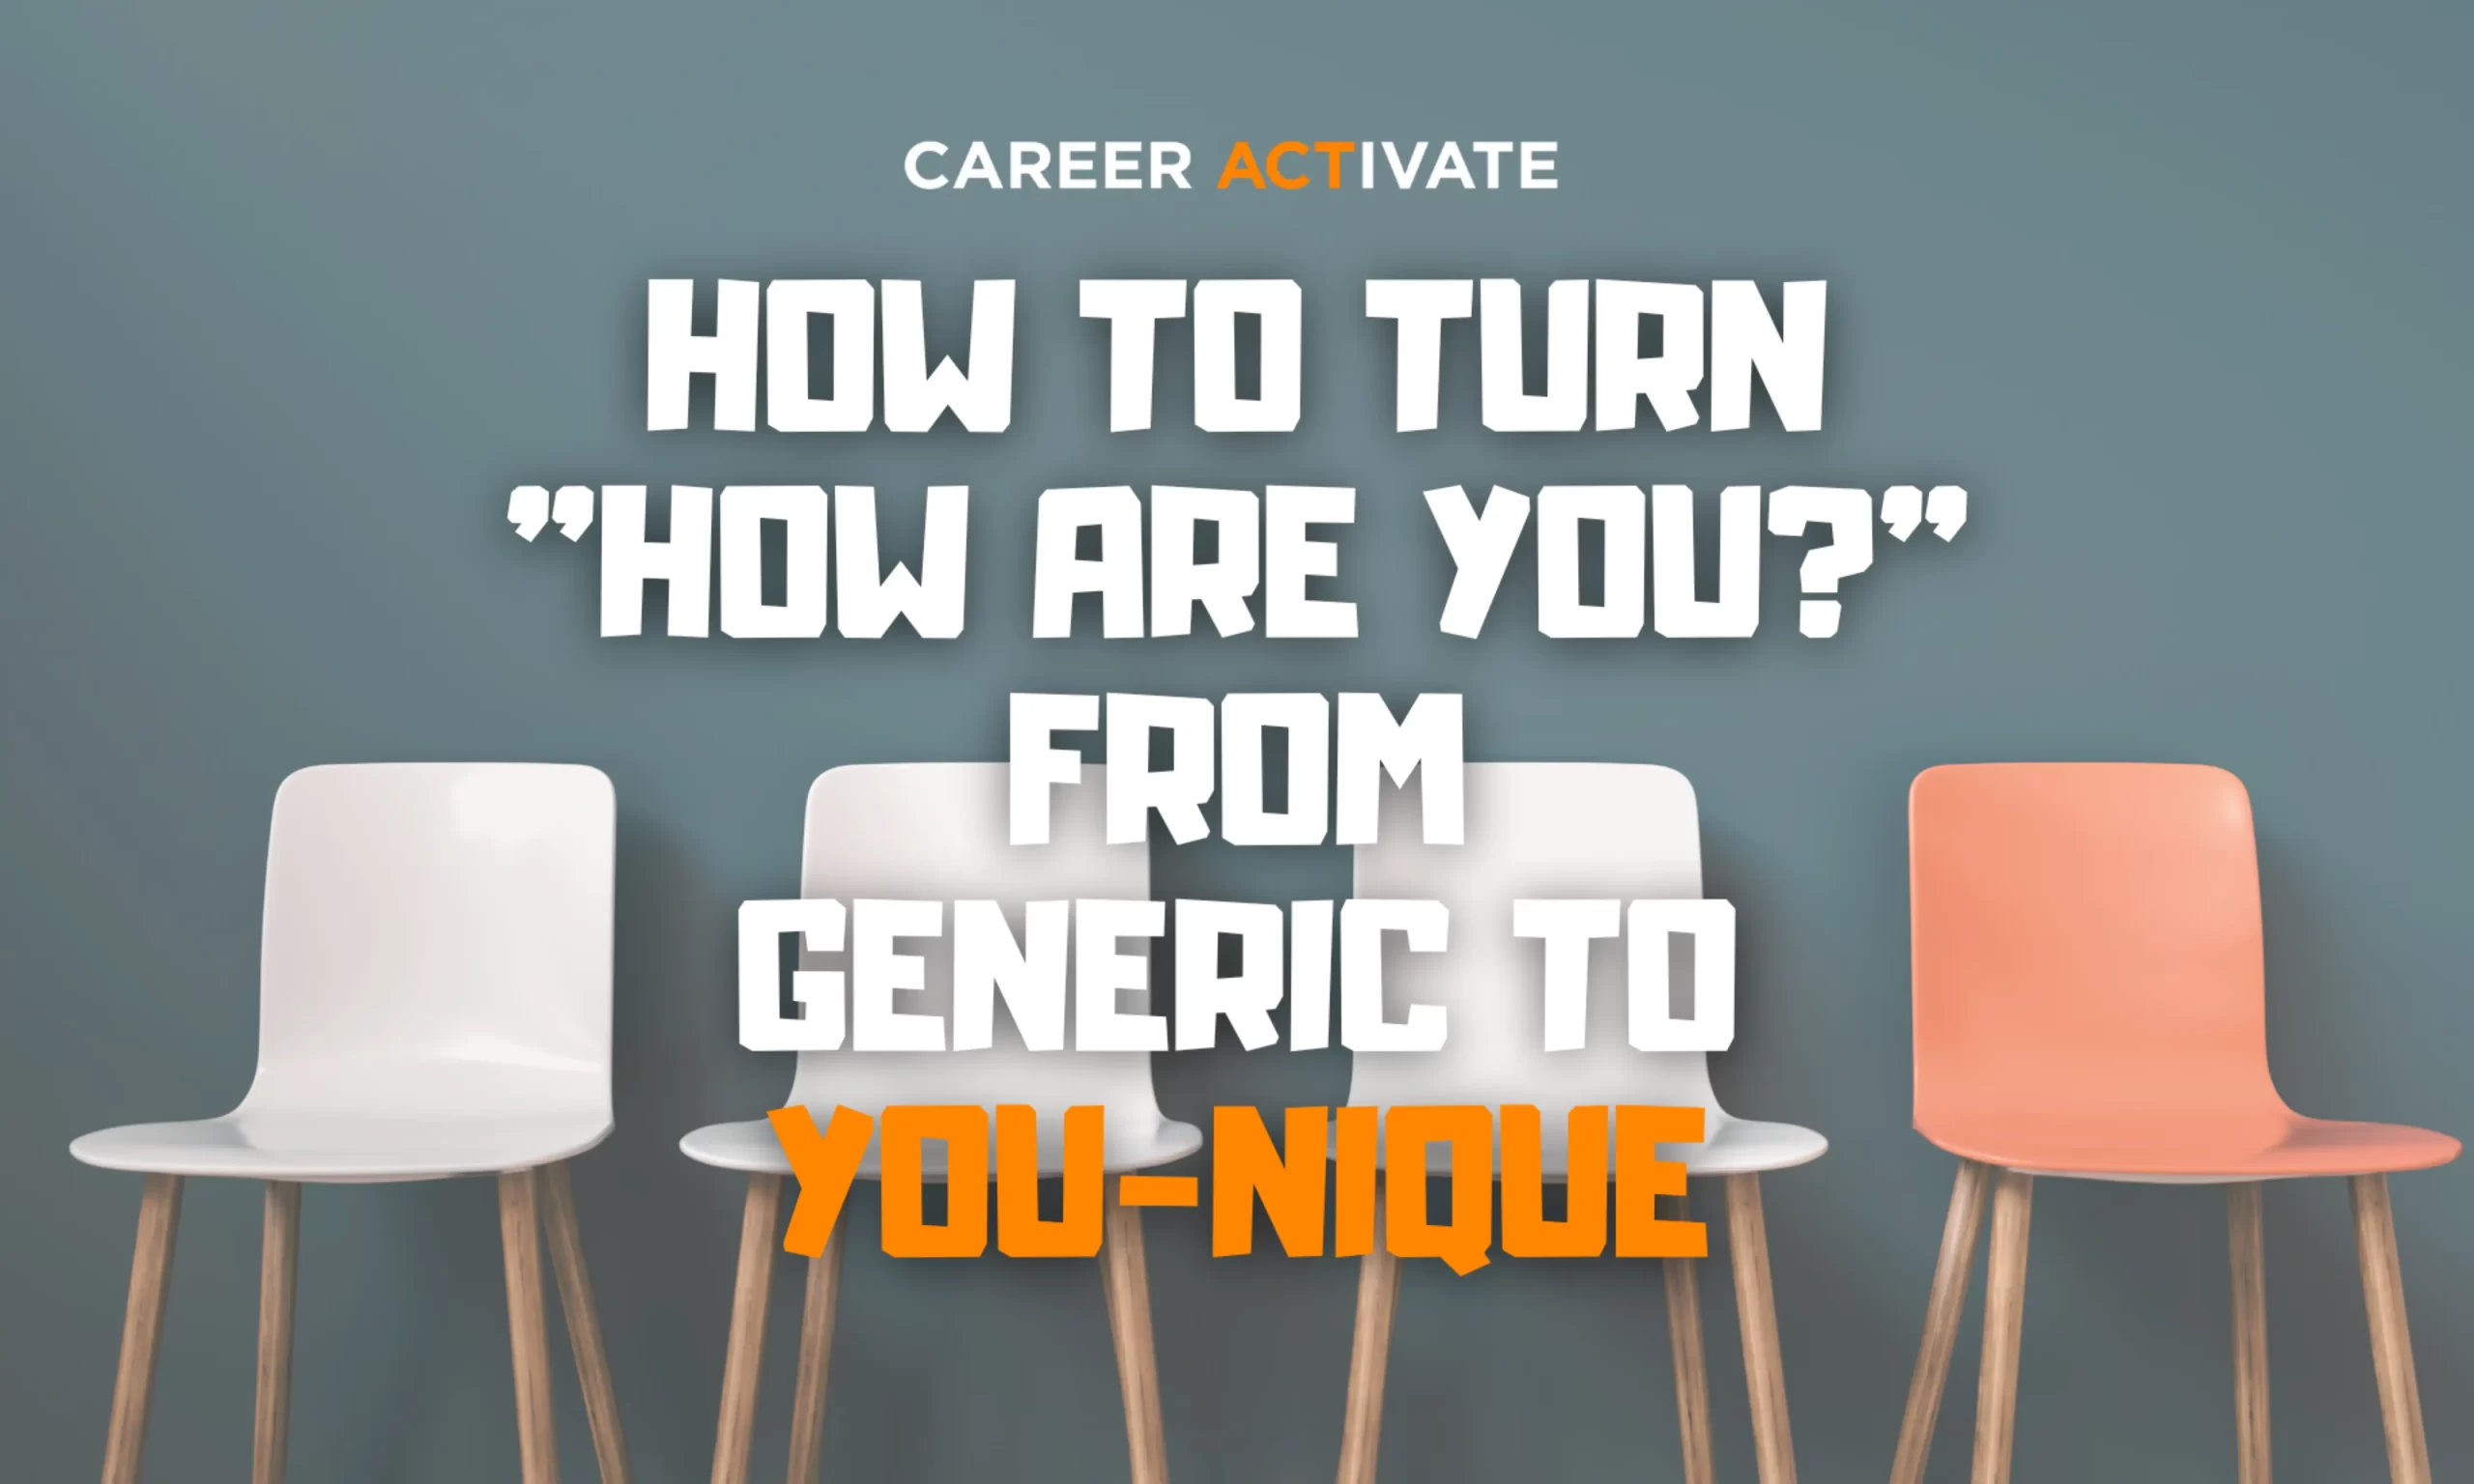 How To Turn “How Are You?” From Generic To YOU-nique